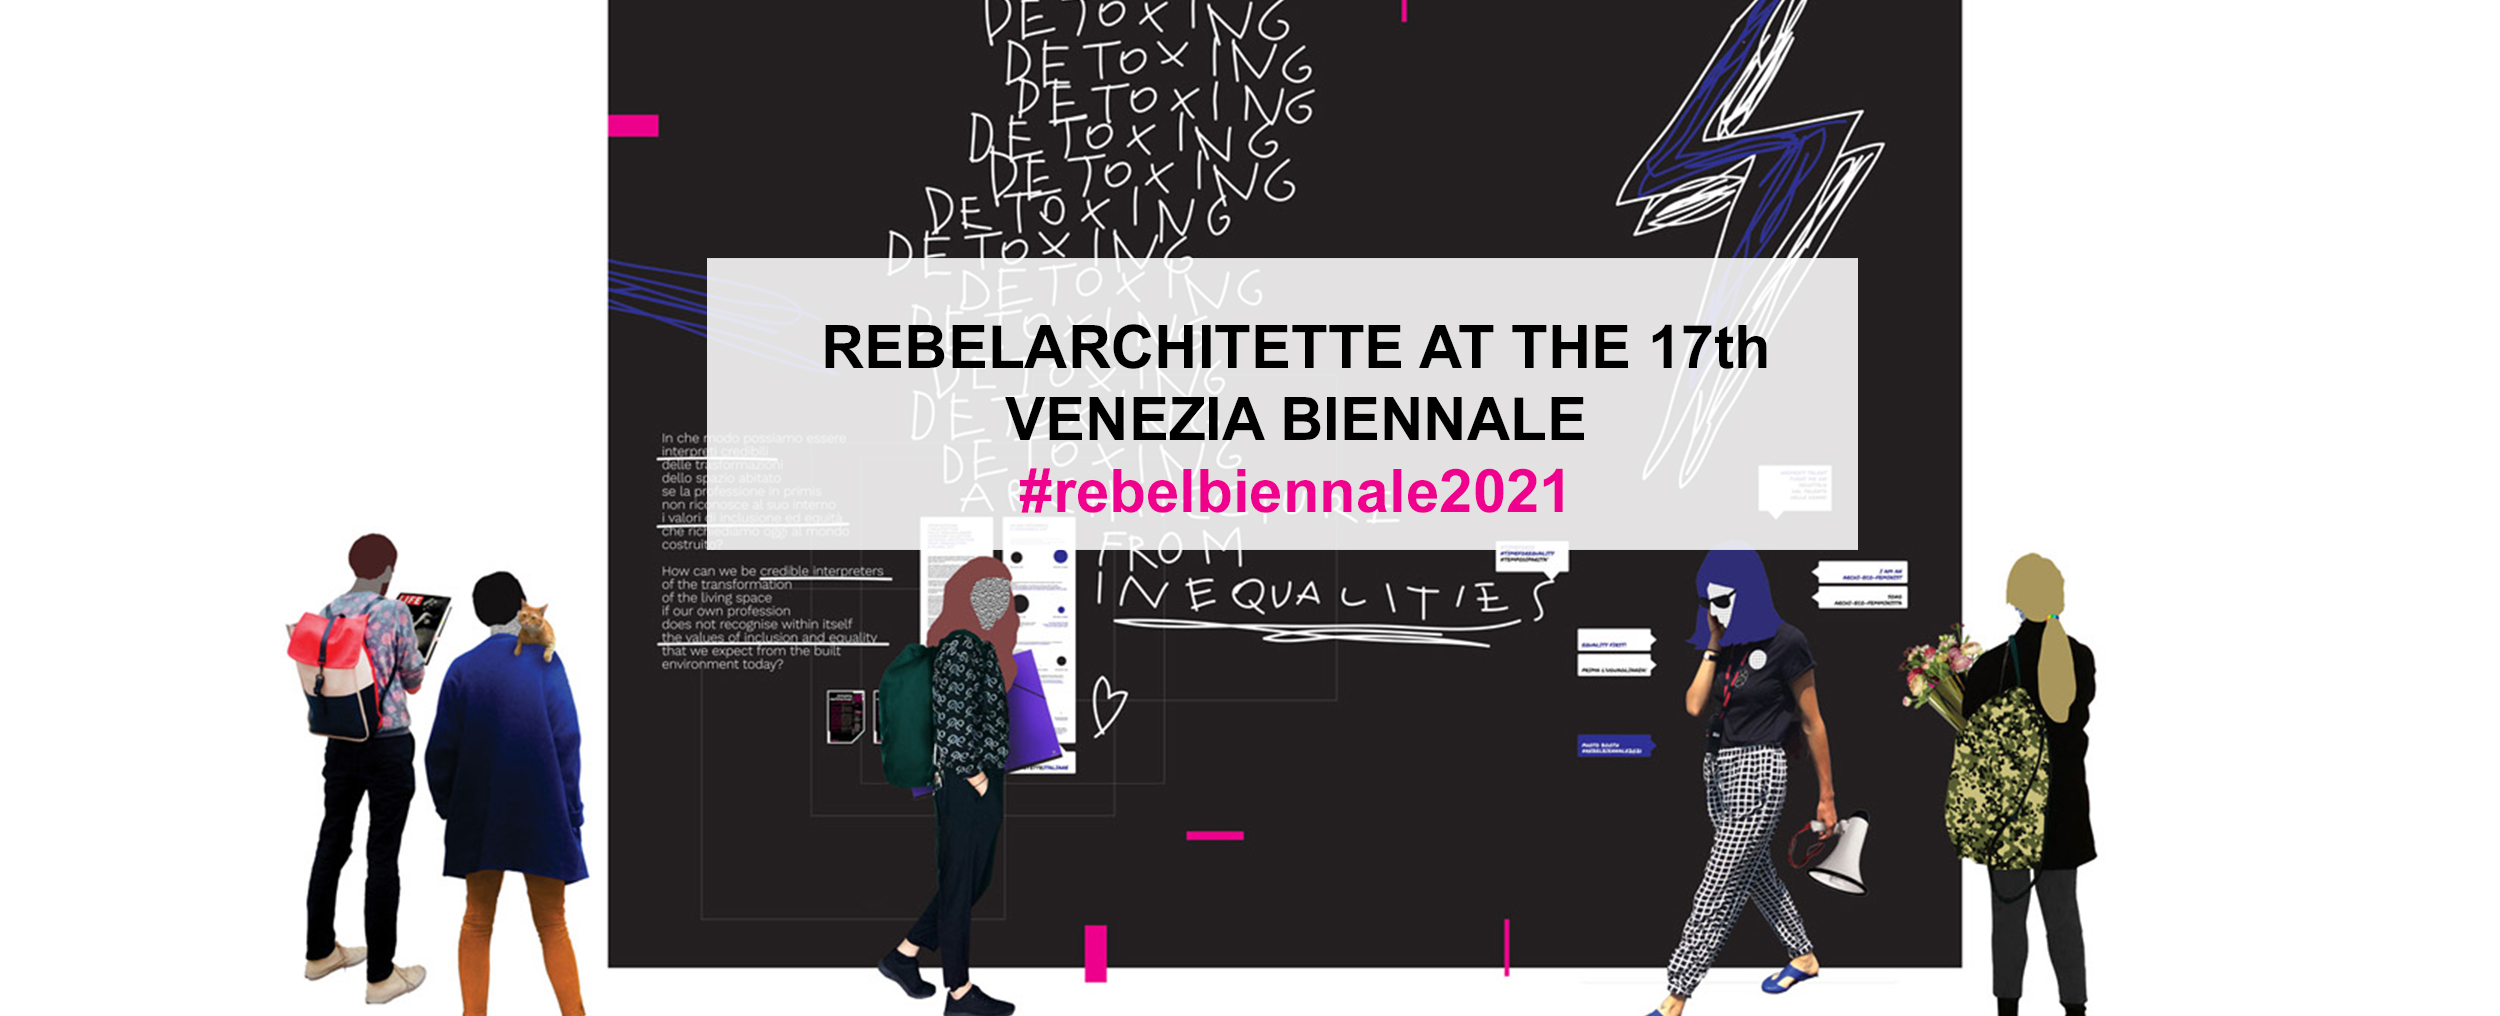 “Detoxing architecture from inequality. A plural act.” Rebel Architette @ Biennale di Venezia 2021 2021, May 6